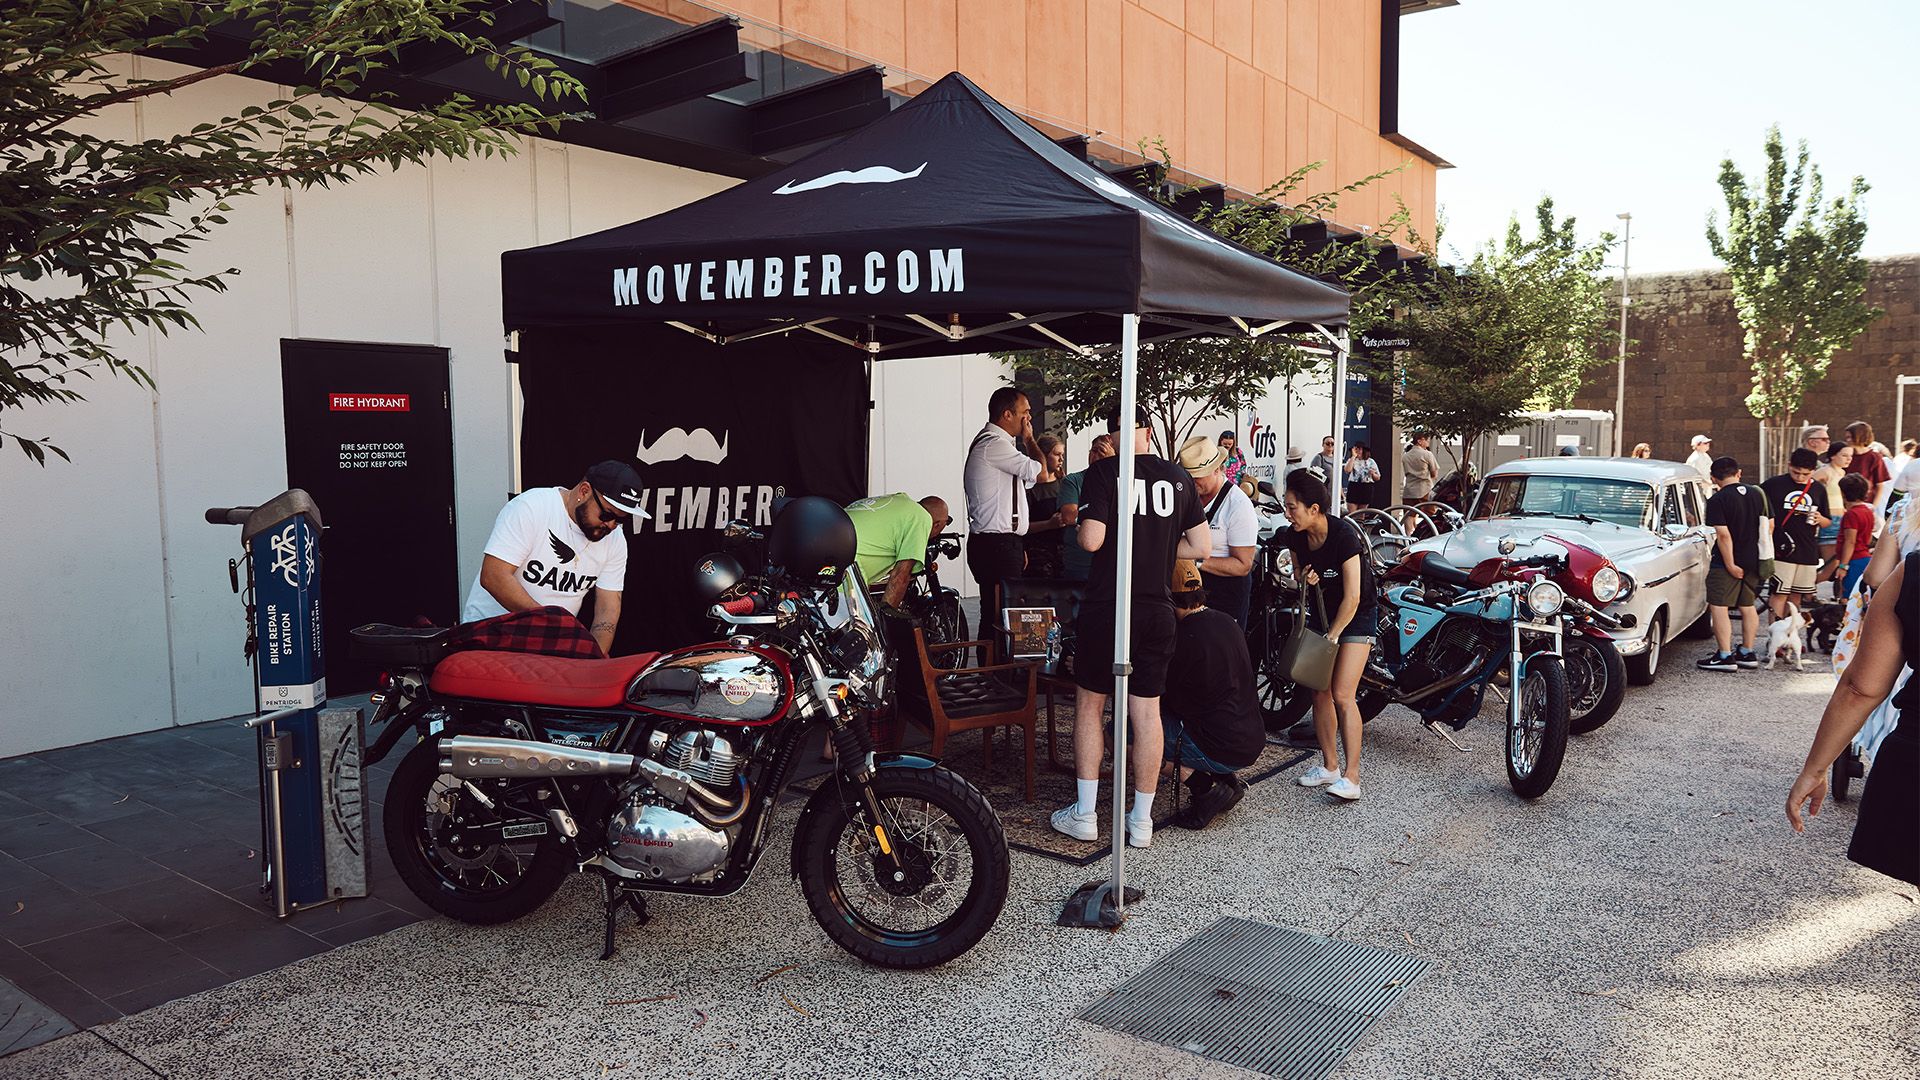 Movember marquee with multiple motorcycles at a market in Melbourne.